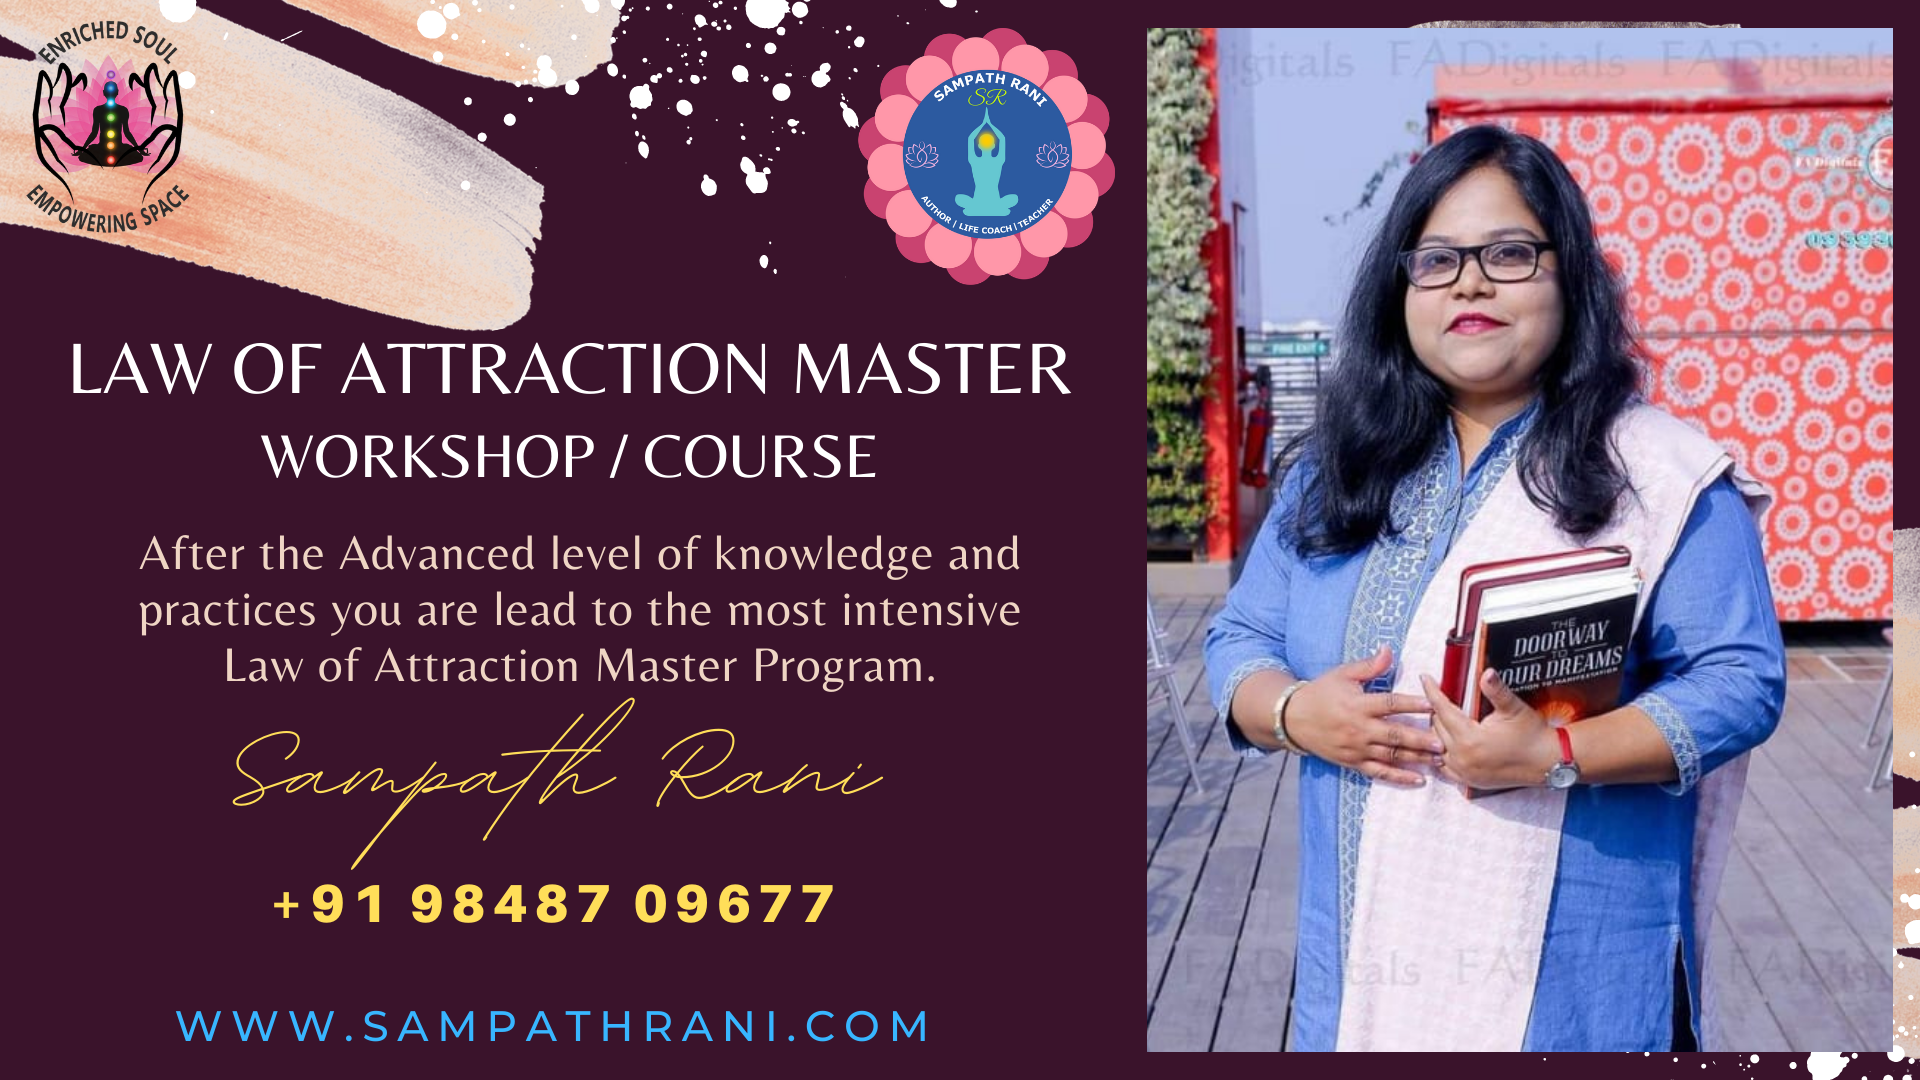 Law of Attraction Master Workshop, Course - by Sampath Rani - Guwahati